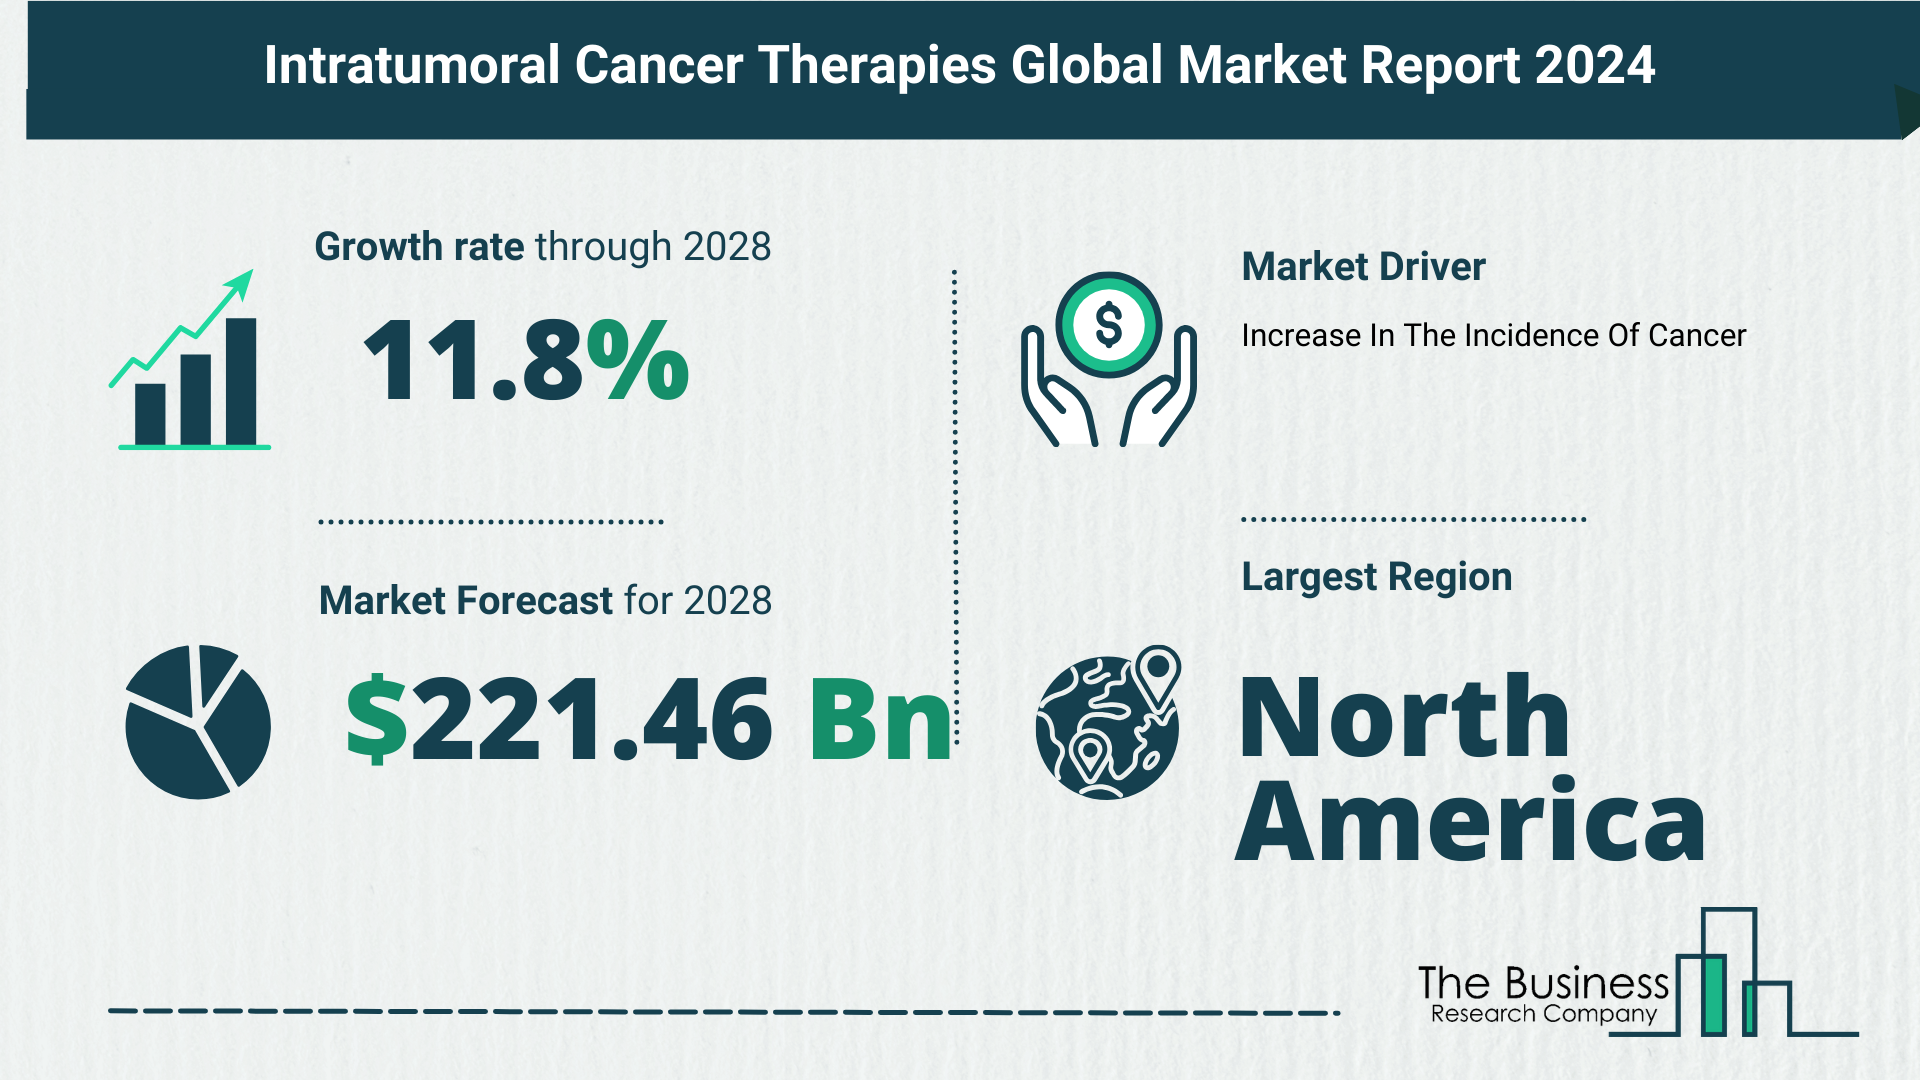 Global Intratumoral Cancer Therapies Market